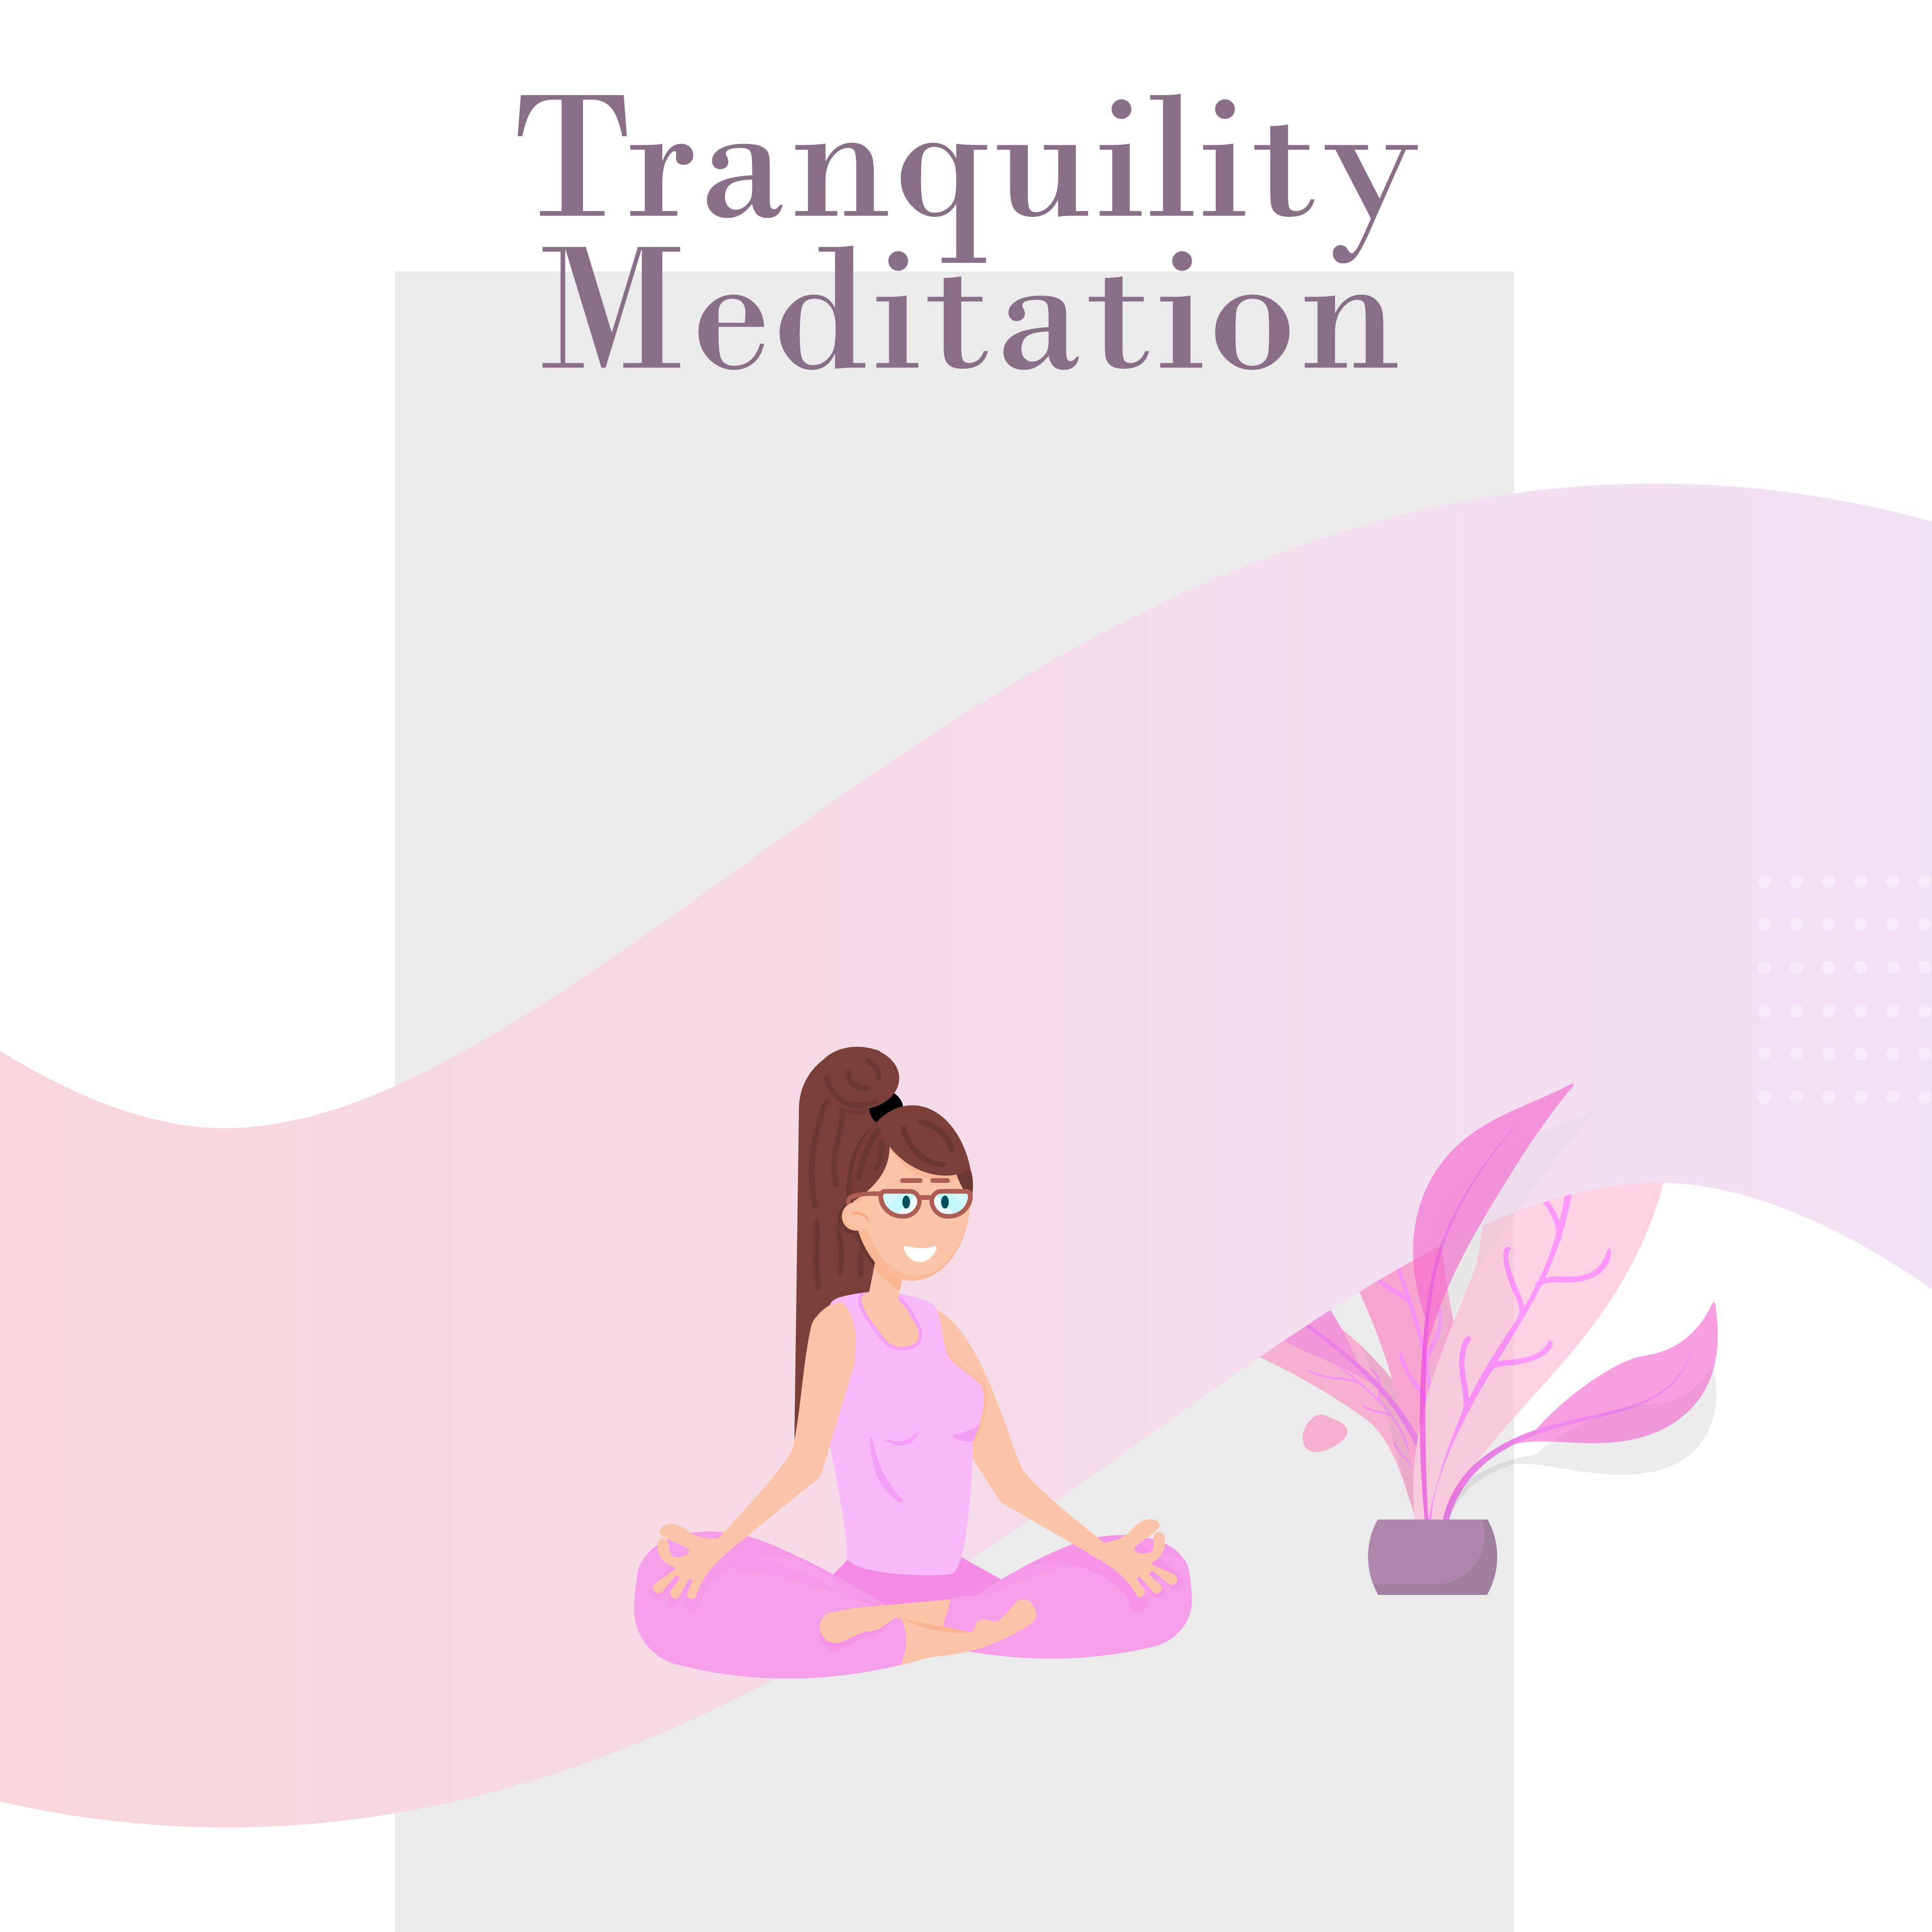 Tranquility Meditation (Samatha) - Music for Meditative Exercises that Develop Concentration and Mental Focus